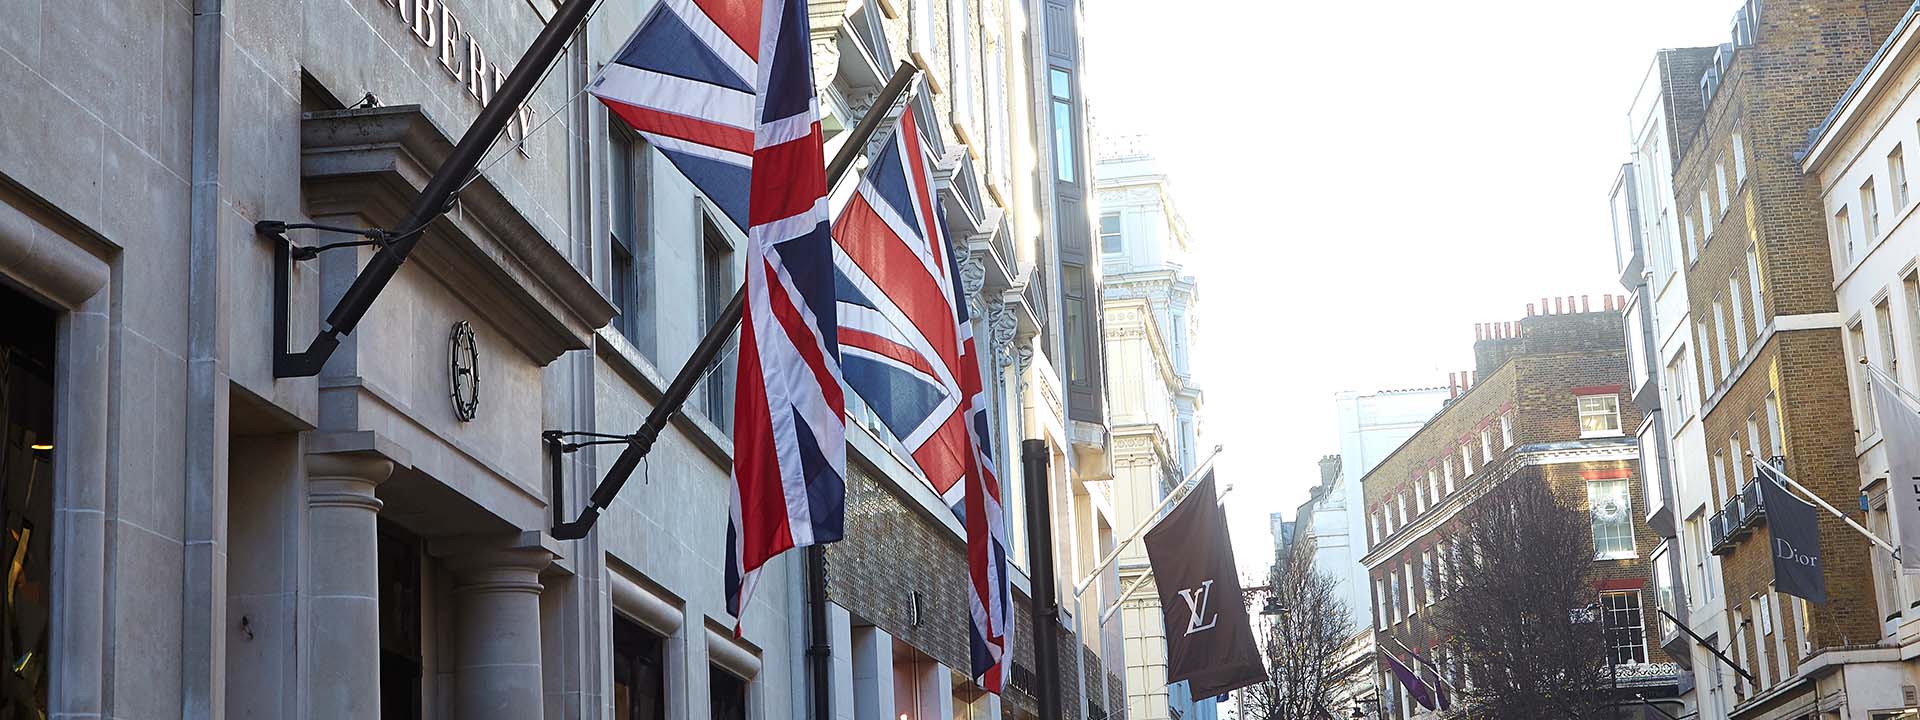 A display of United Kingdom flags, while the rest of the street is in the background.